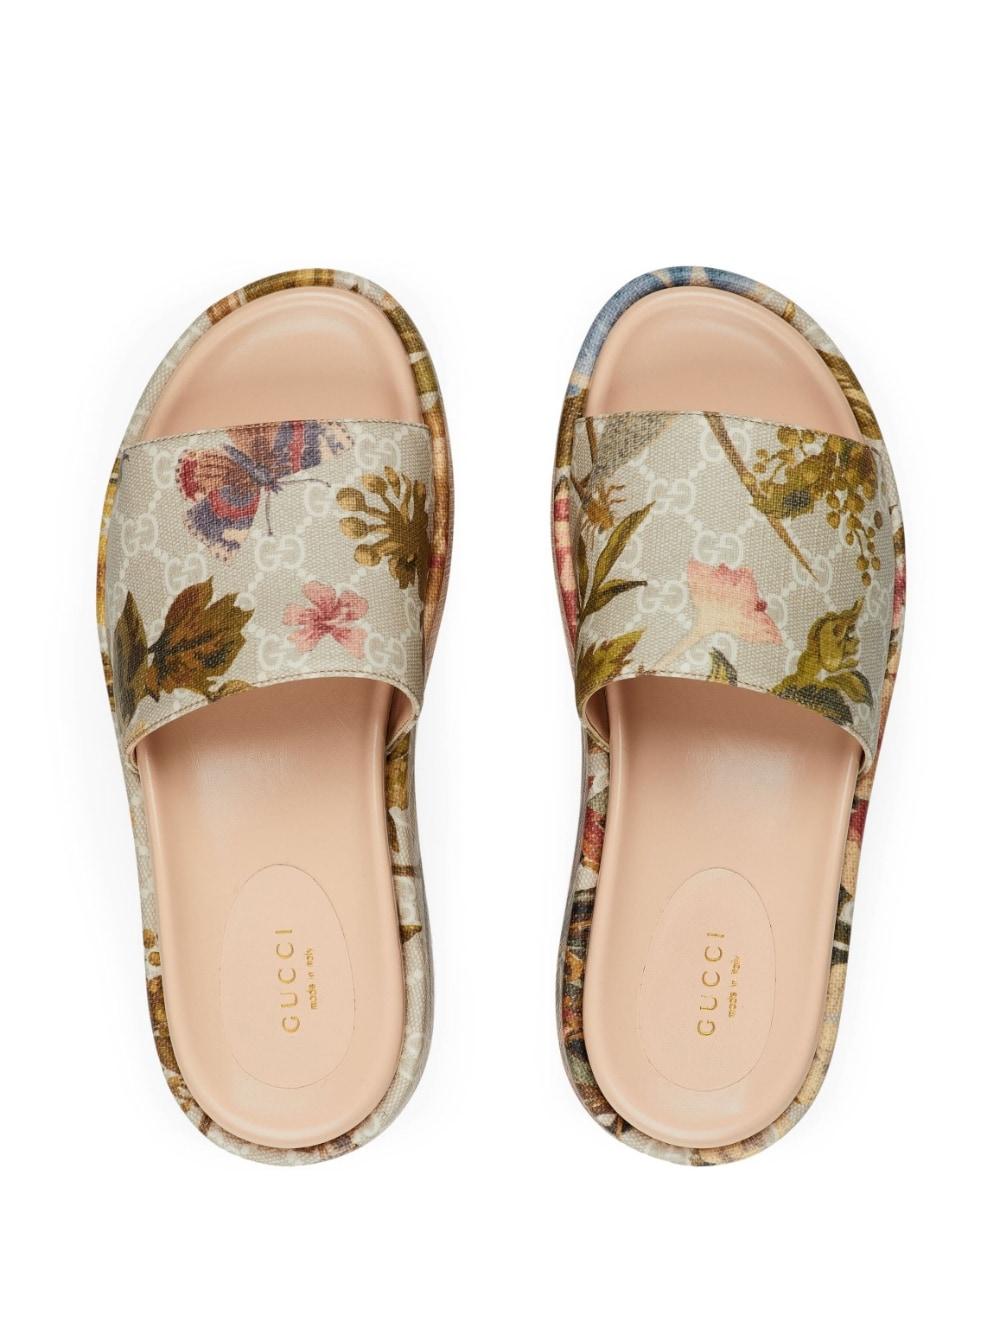 Gucci Floral-print Single-strap Slides in White | Lyst